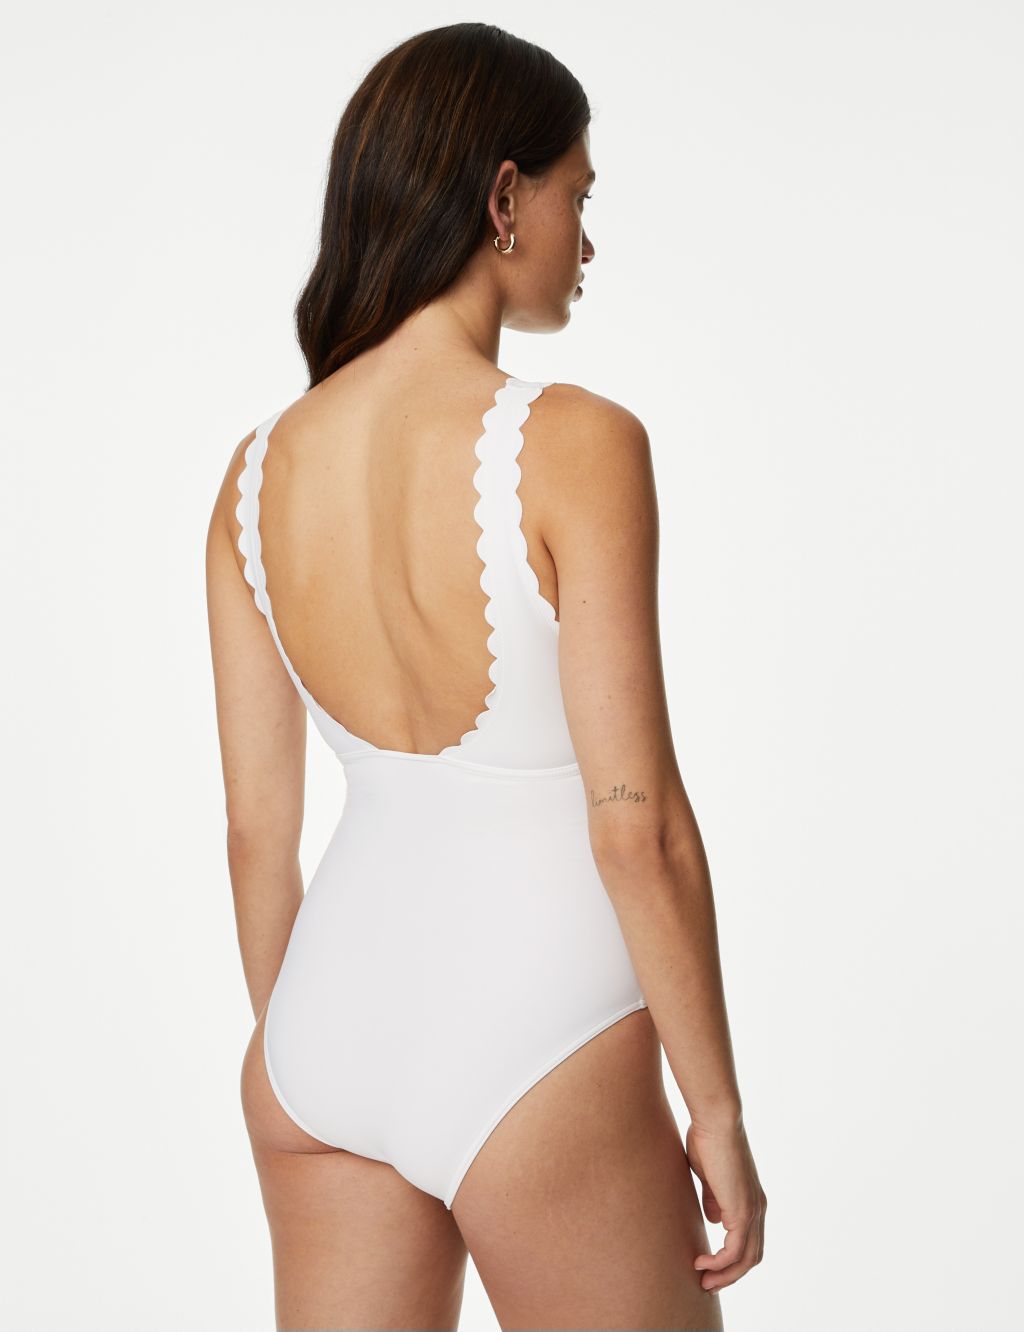 Padded Scallop Plunge Swimsuit image 3